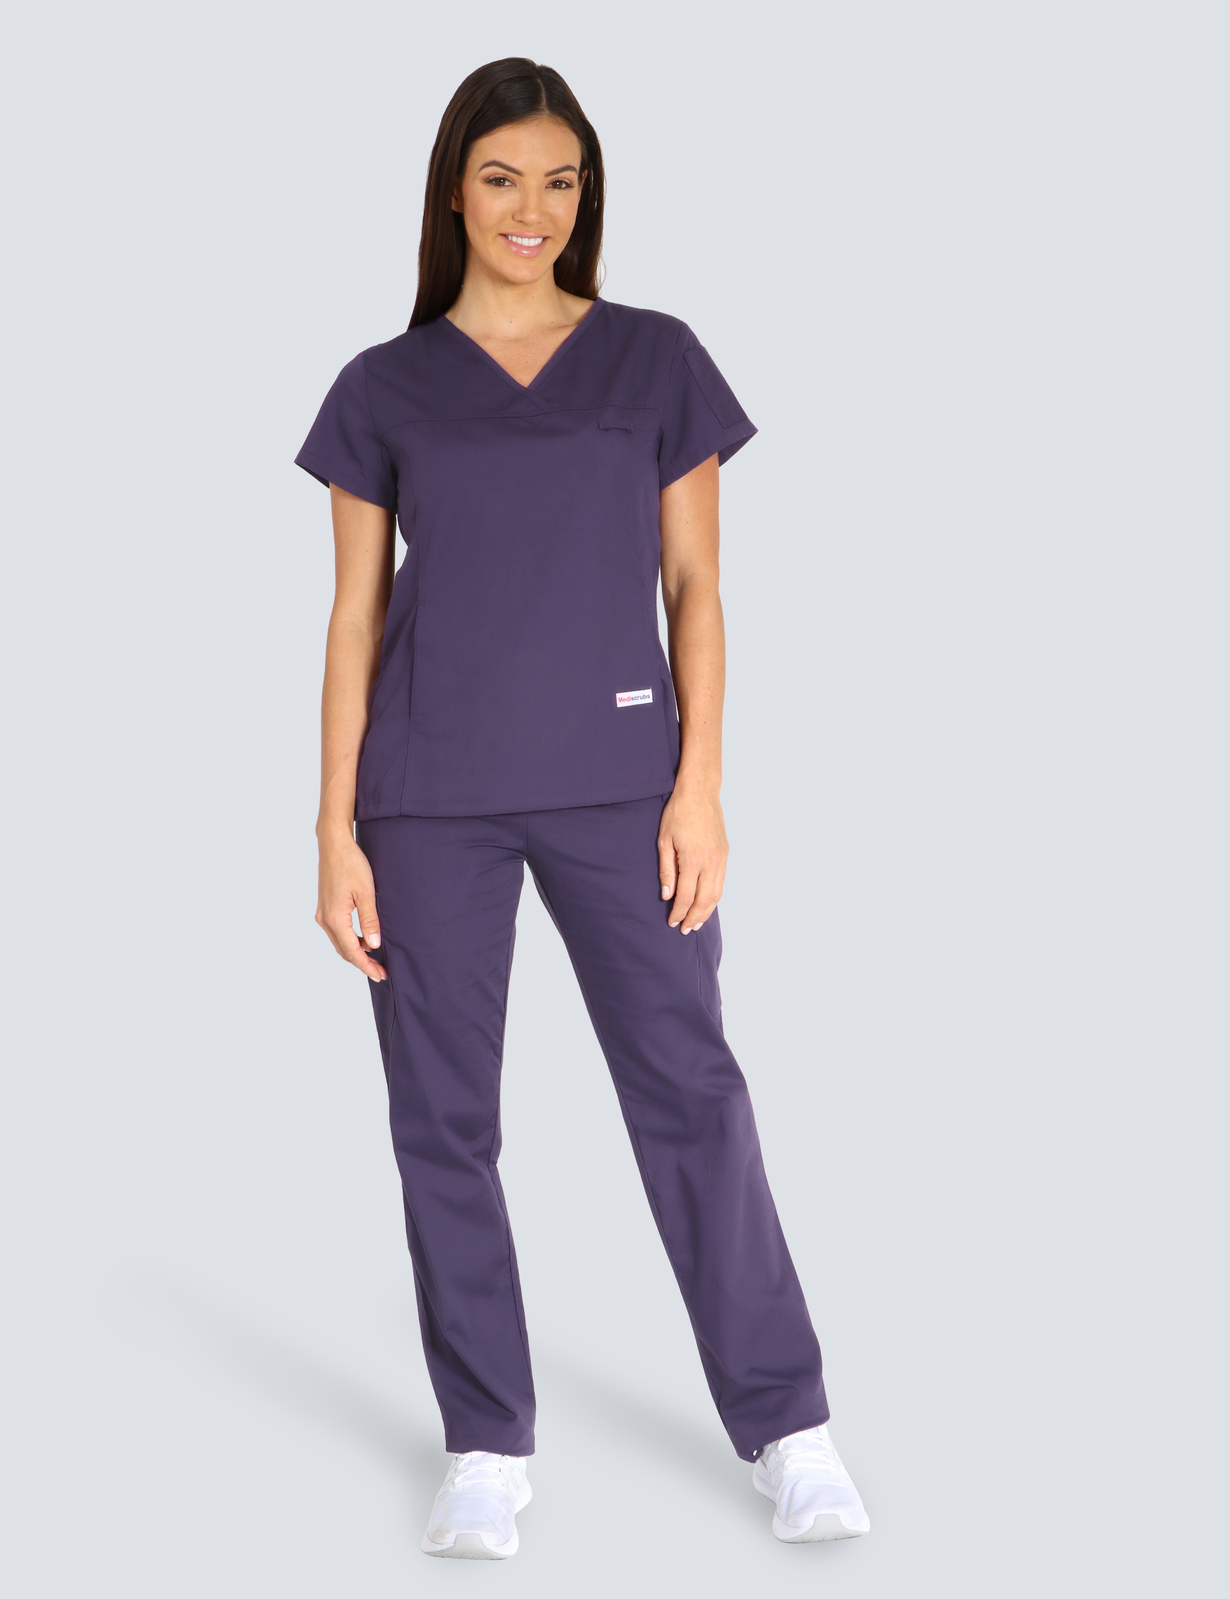 Ipswich Hospital - Midwifery (Women's Fit Solid Scrub Top and Cargo Pants in Aubergine incl Logos)